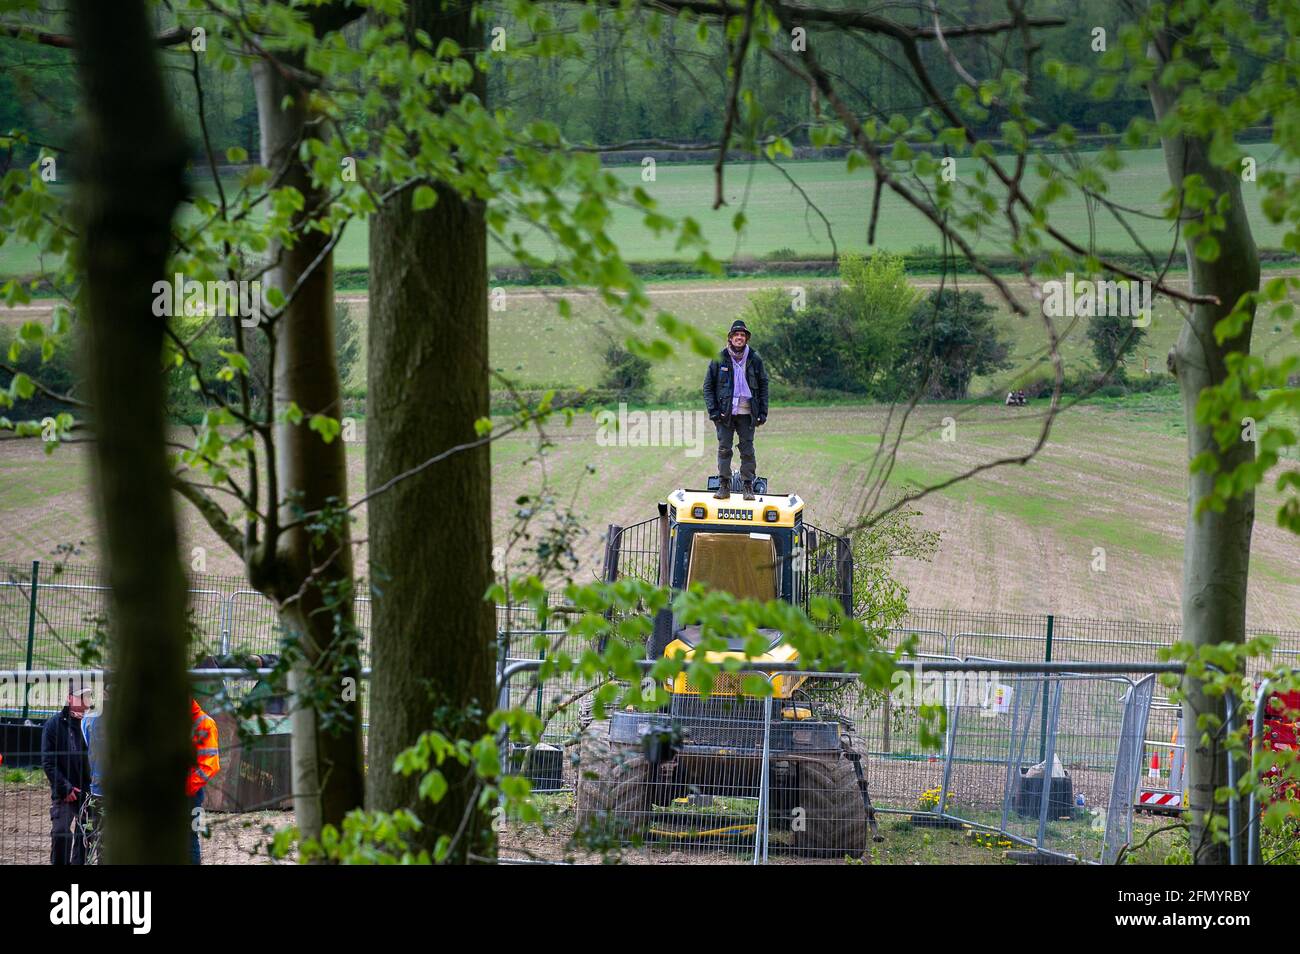 Aylesbury Vale, UK. 12th May, 2021. An anti HS2 protester covertly entered the heavily guarded HS2 compound at Jones Hill Wood today and occupied HS2 machinery to delay HS2 work. Thames Valley Police climbers removed the peaceful protester later this afternoon and arrested the young man. Meanwhile HS2 tree fellers were felling a large number of mature beech trees in the ancient woodland today despite the licence granted to HS2 from Natural England allegedly having expired. Rare Barbastelle bats are known to roost in the woods. Credit: Maureen McLean/Alamy Live News Stock Photo